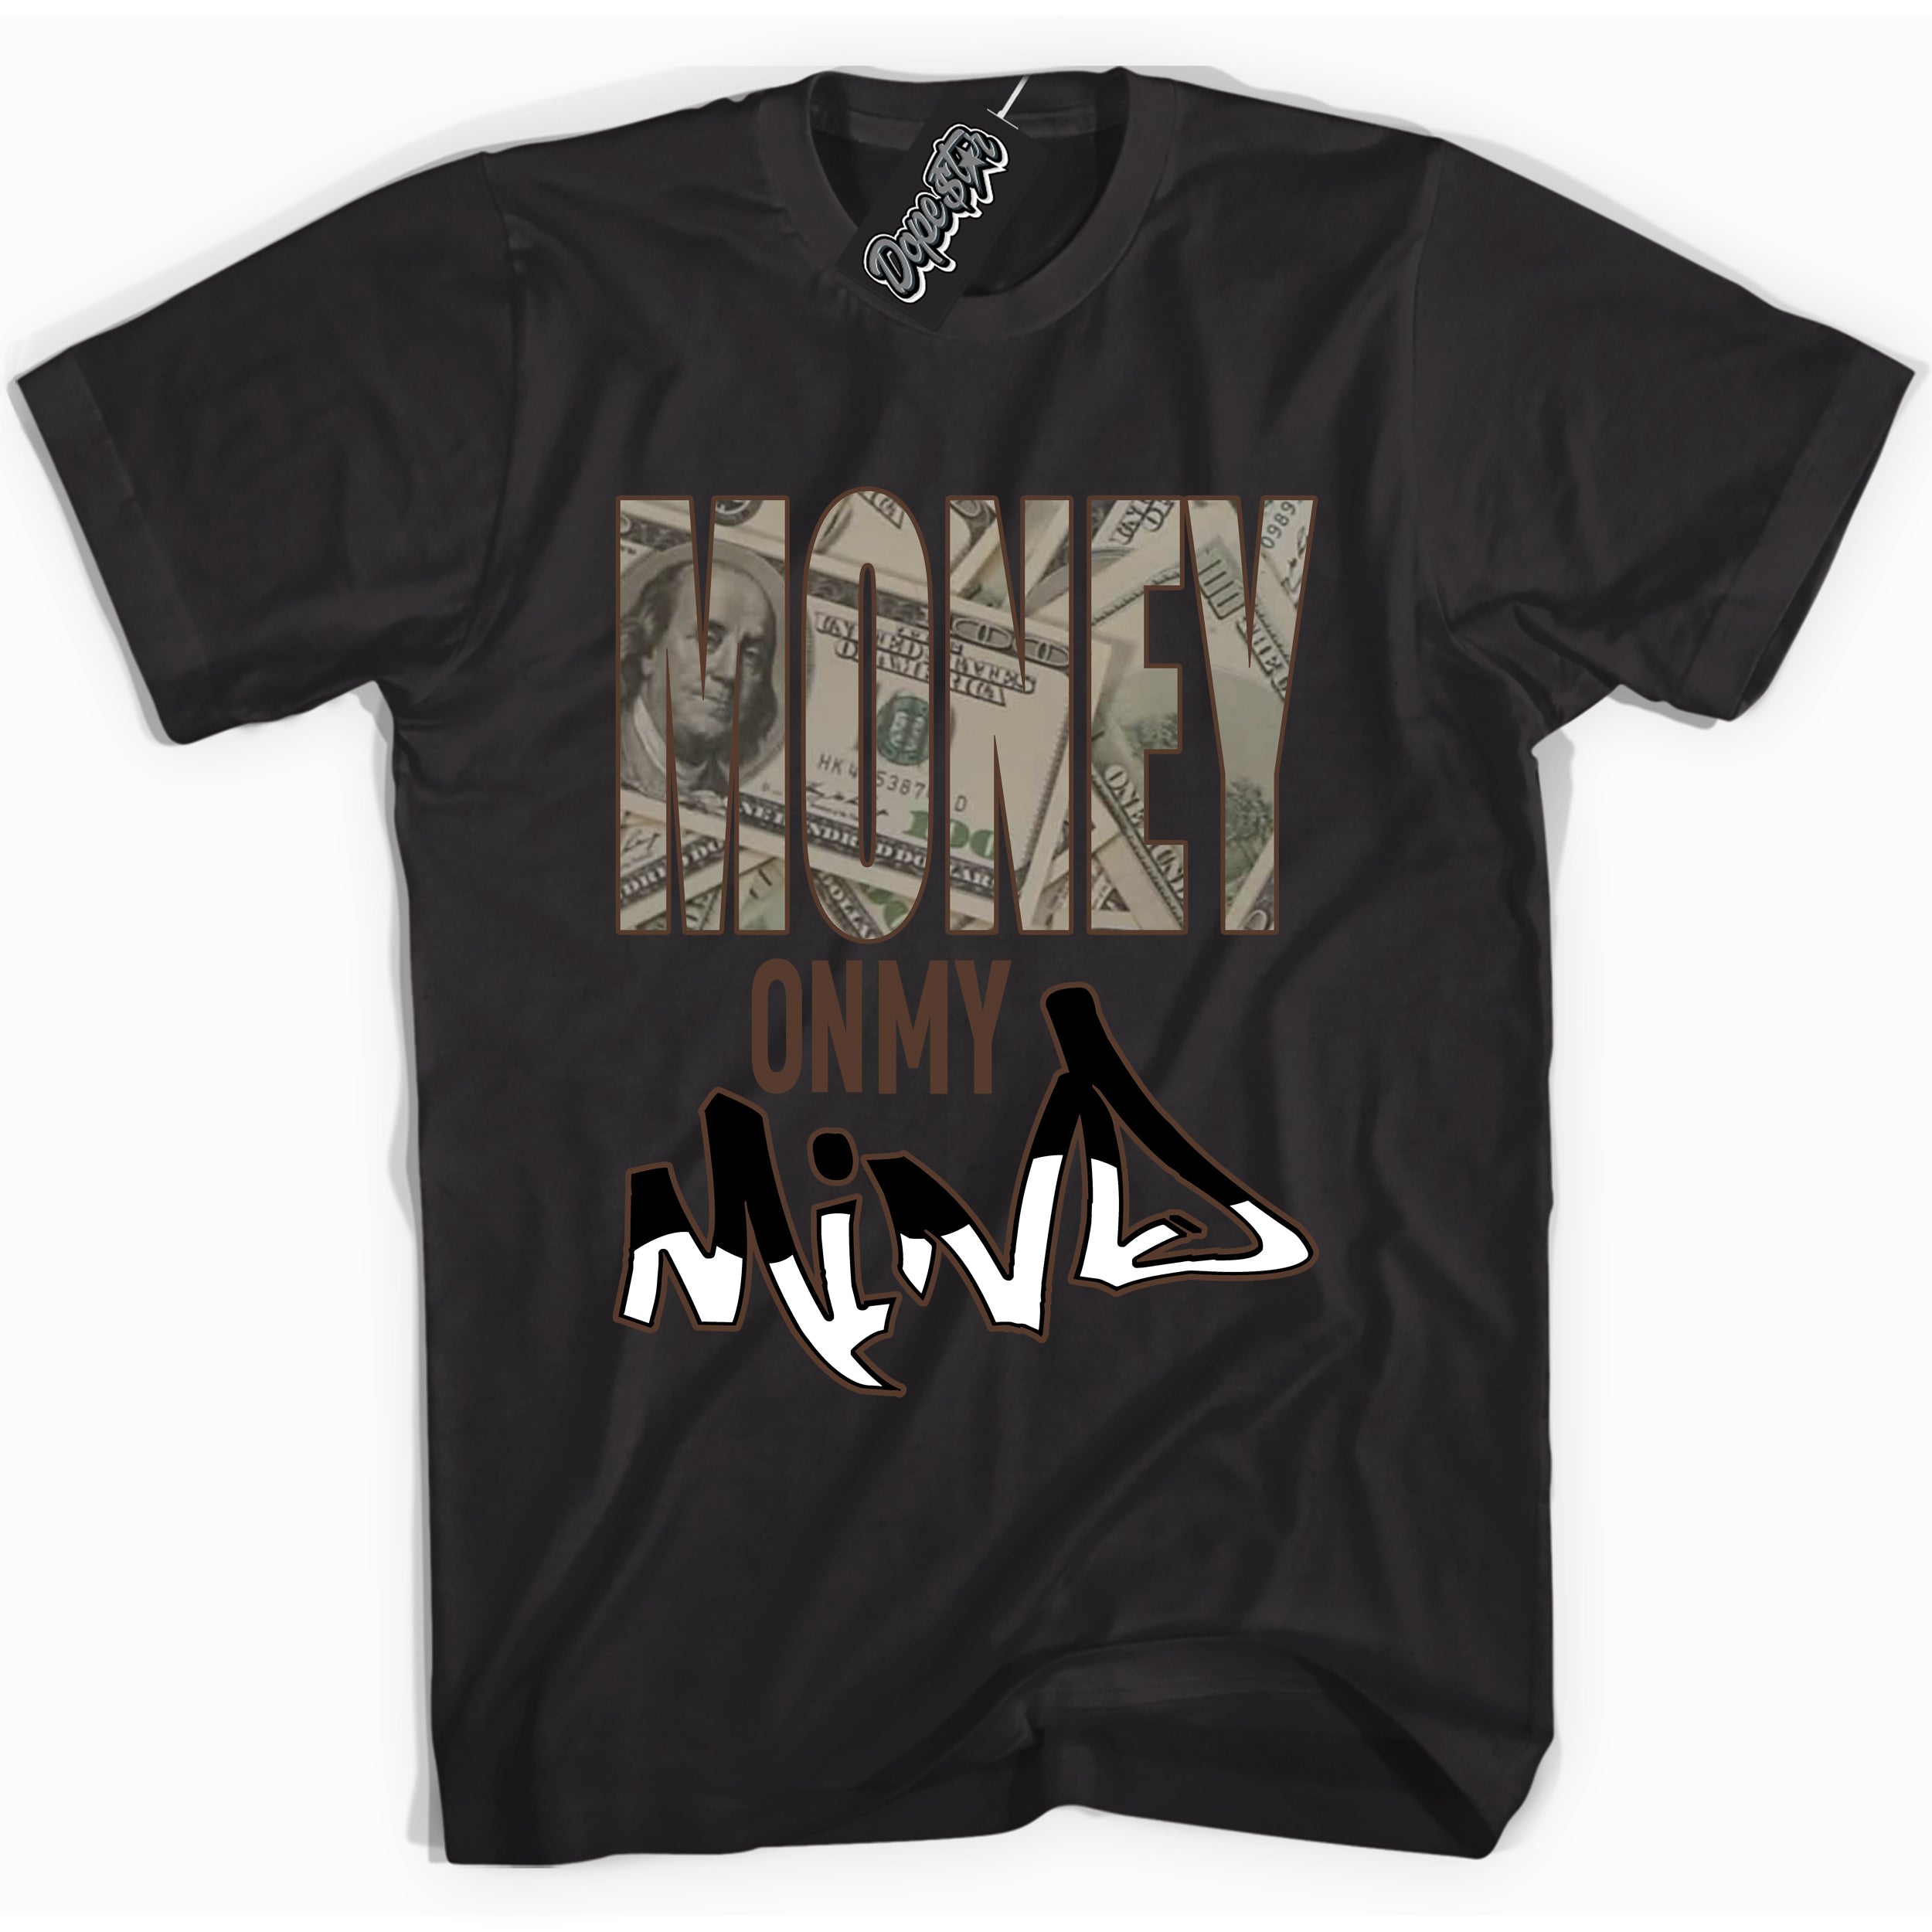 Cool Black graphic tee with “ Money On My Mind ” design, that perfectly matches Palomino 1s sneakers 